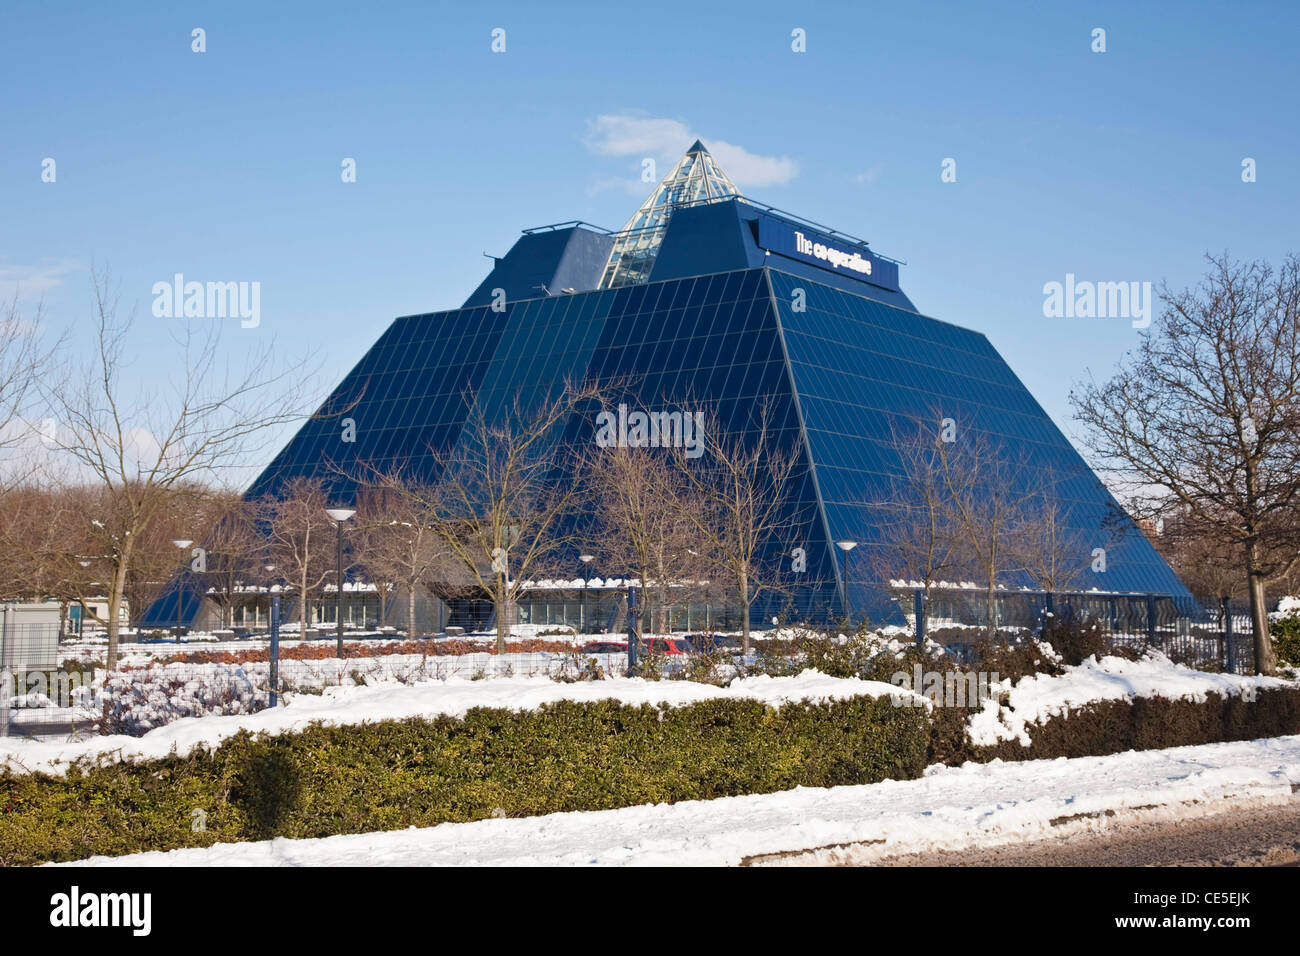 Stockport's Co-operative Pyramid in the snow on a sunny day Stock Photo